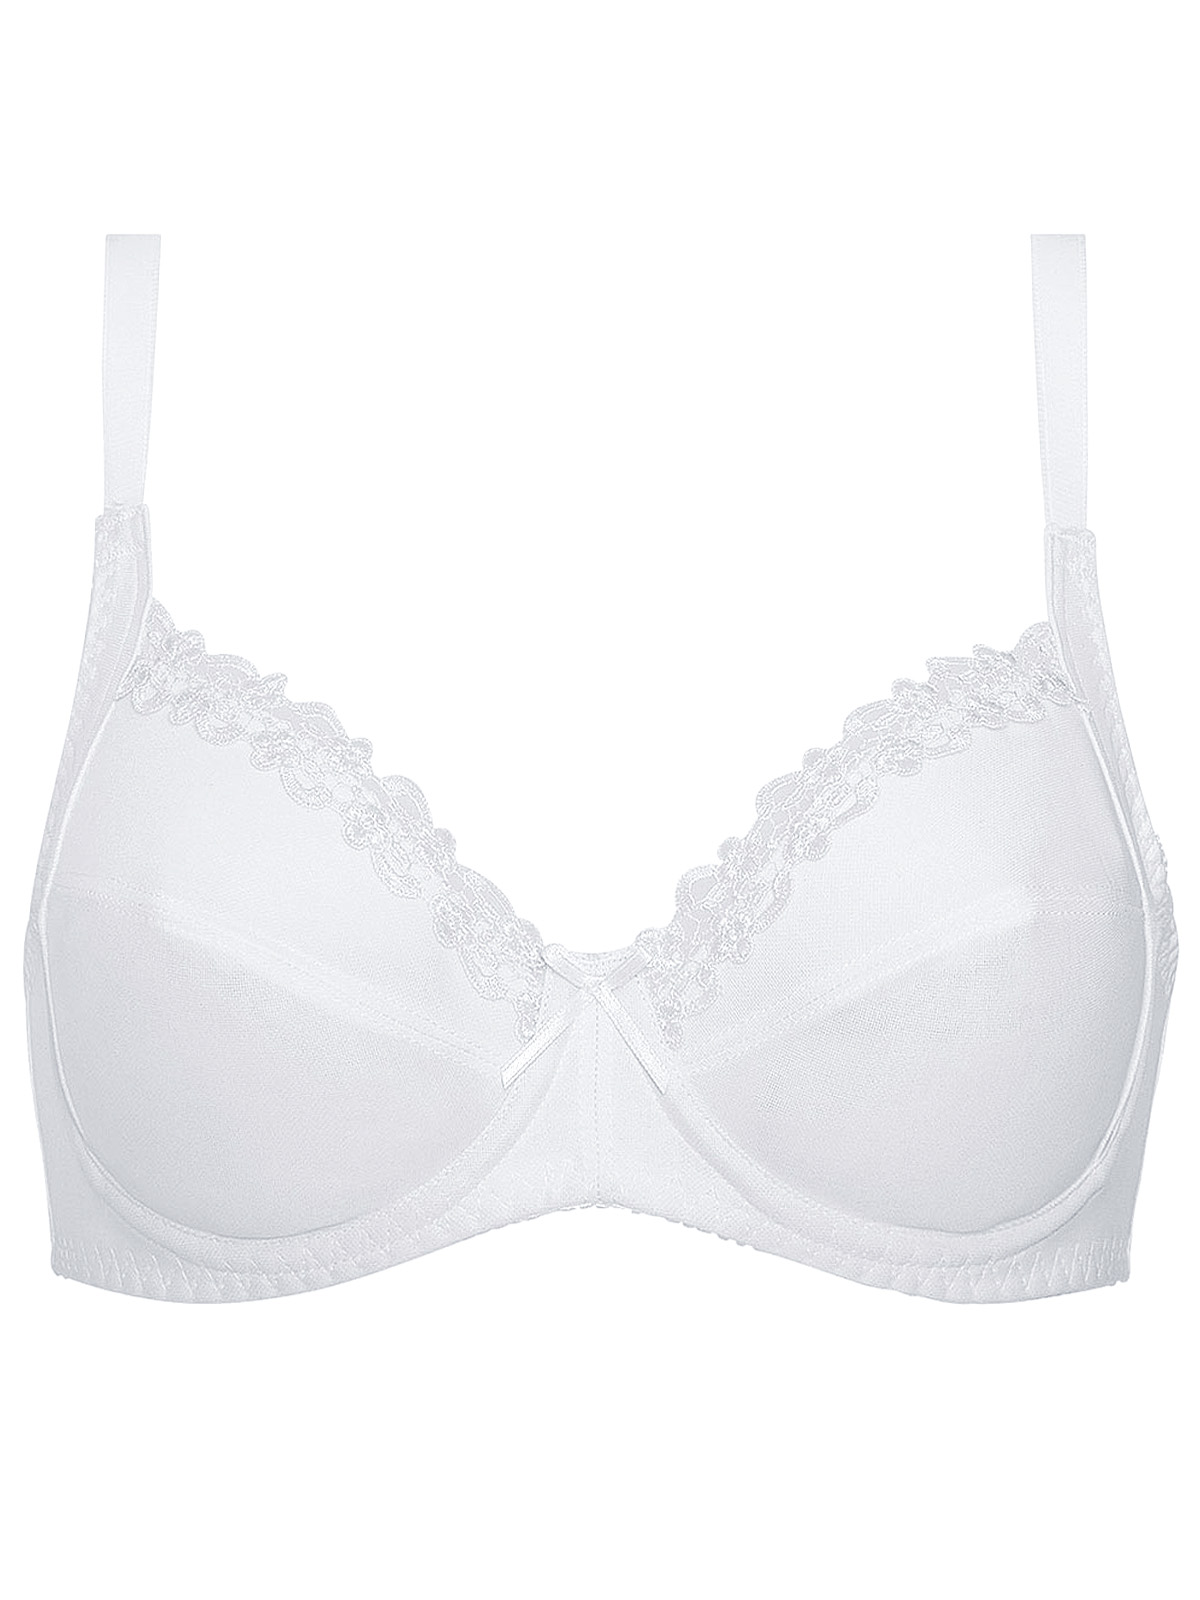 Naturana Naturana White Soft Cup Underwired Full Cup Bra Size 34 To 44 B C D Dd E